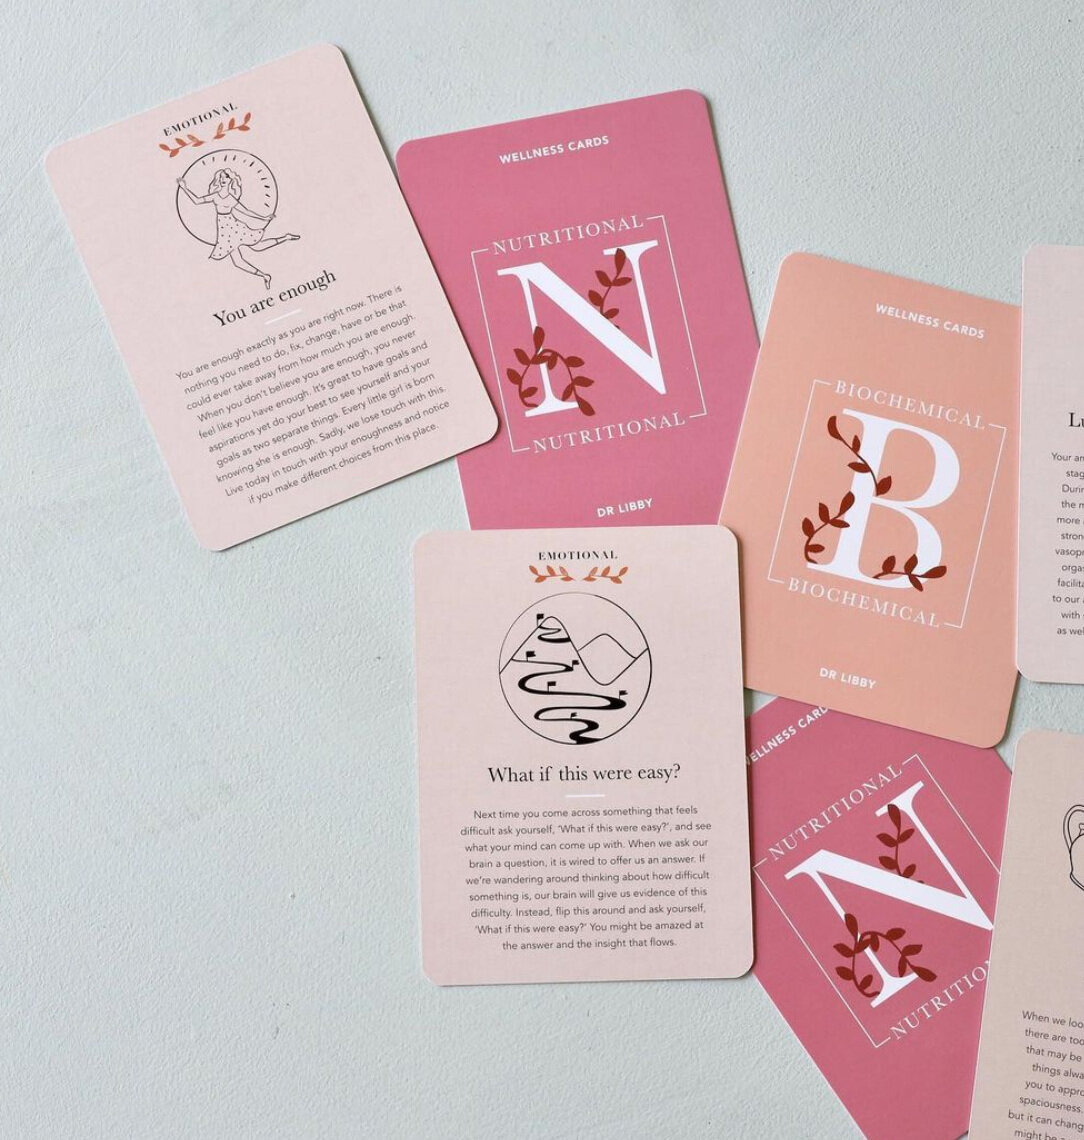 Wellness Cards by Dr Libby